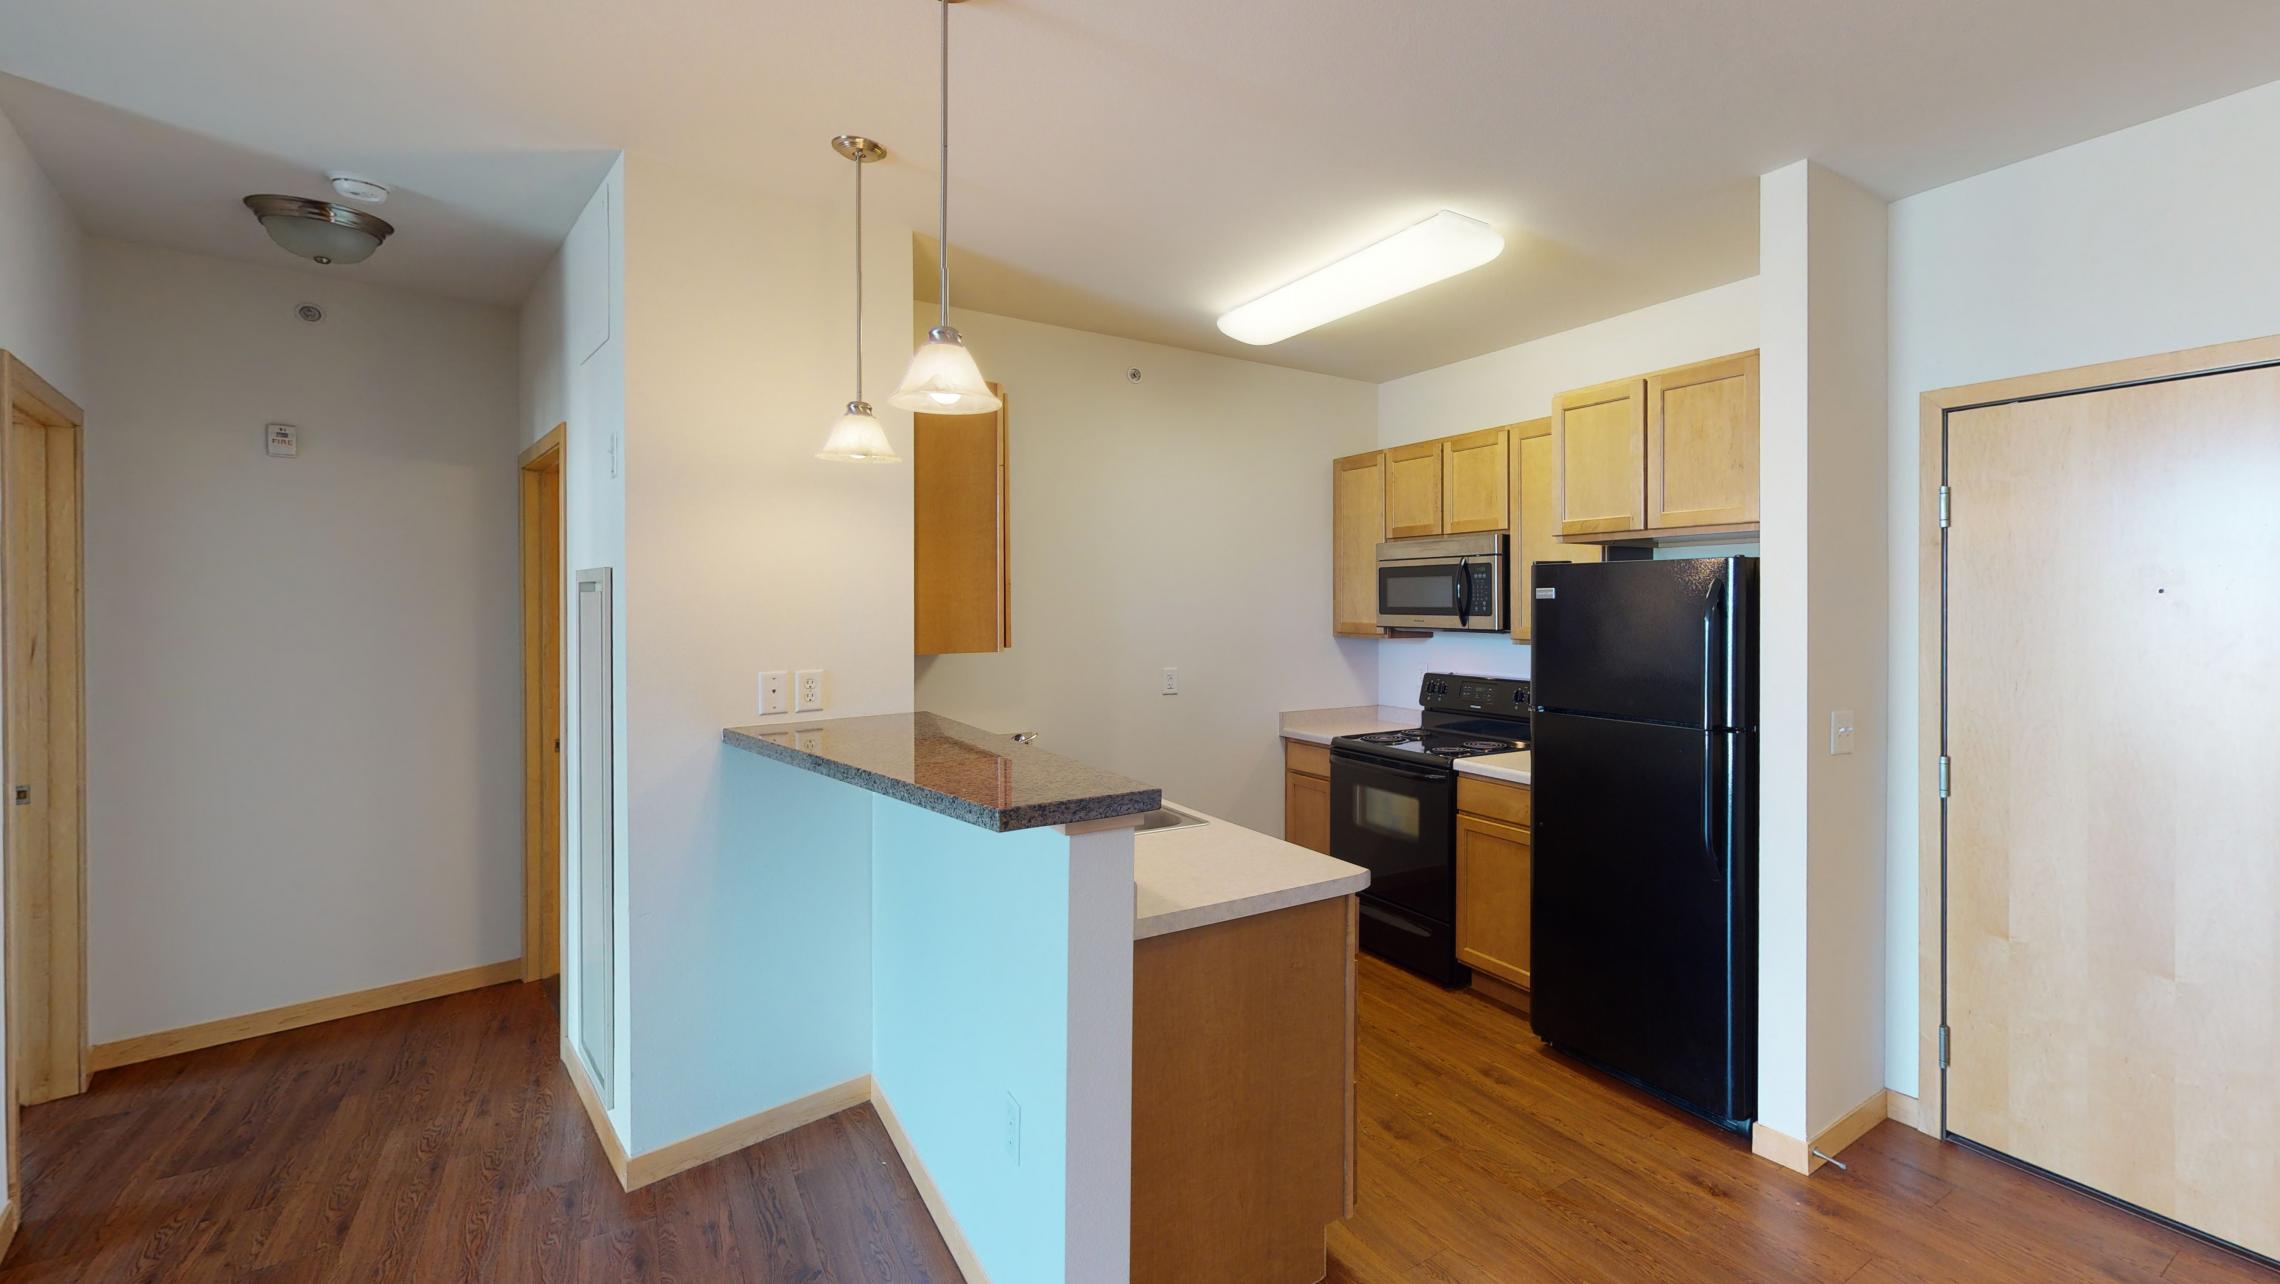 The-Depot-Apartment-1-314-One-Bedroom-Kitchen-Living-Bathroom-Storgae-Bathtub-Rooftop-Terrace-Fitness-Downtown-Madison-Capitol-Bike-Trails-Cats-Lifestyle-City-Lake